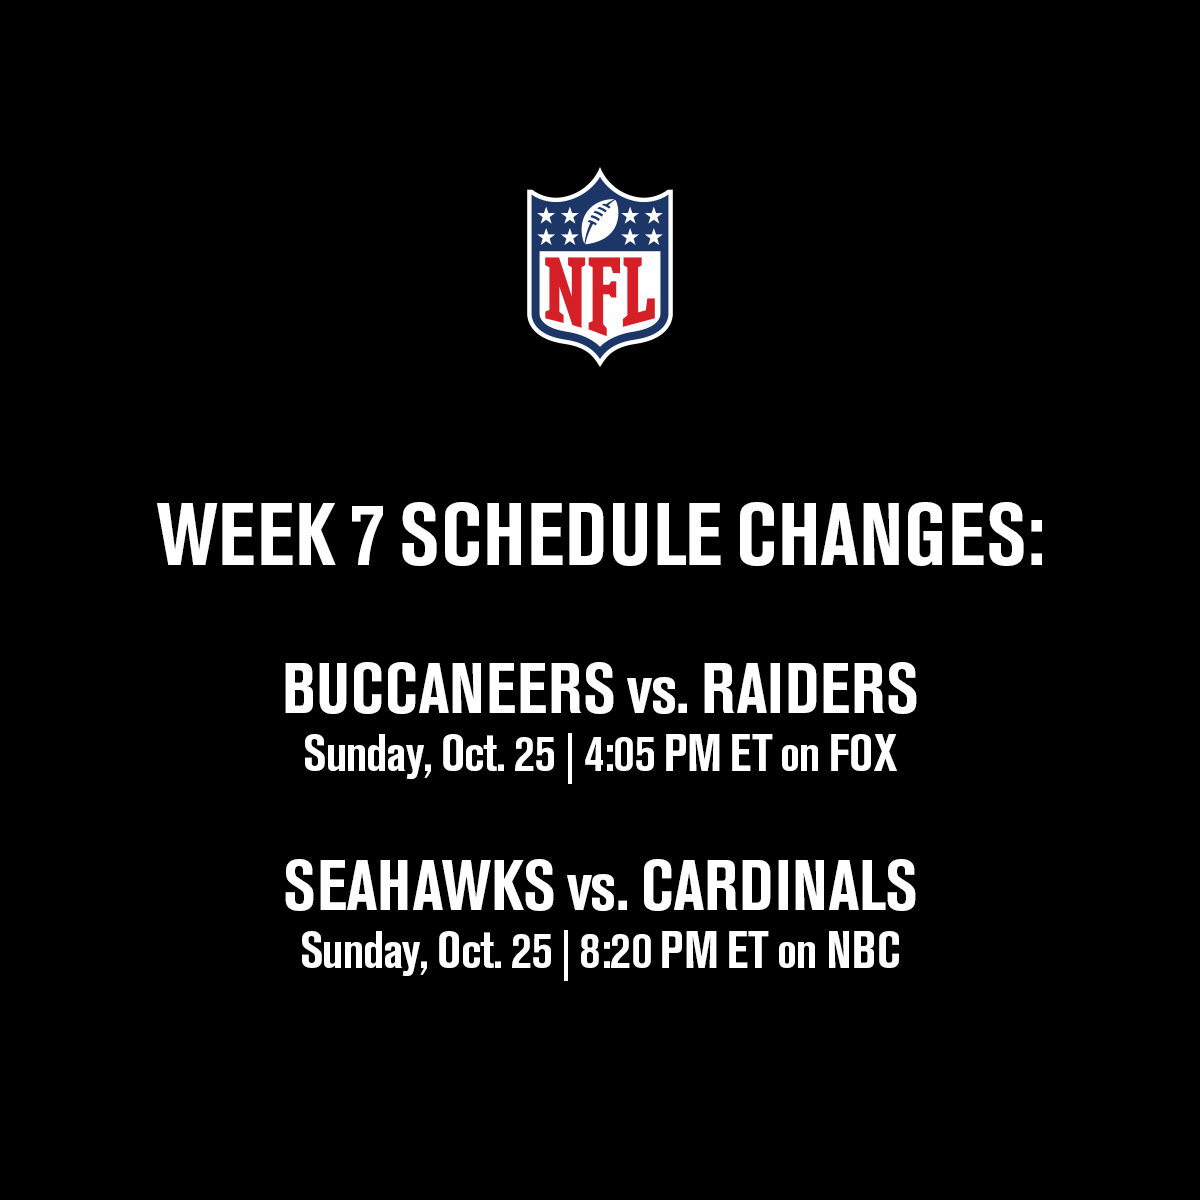 NFL on X: 'The following schedule changes have been made for Week